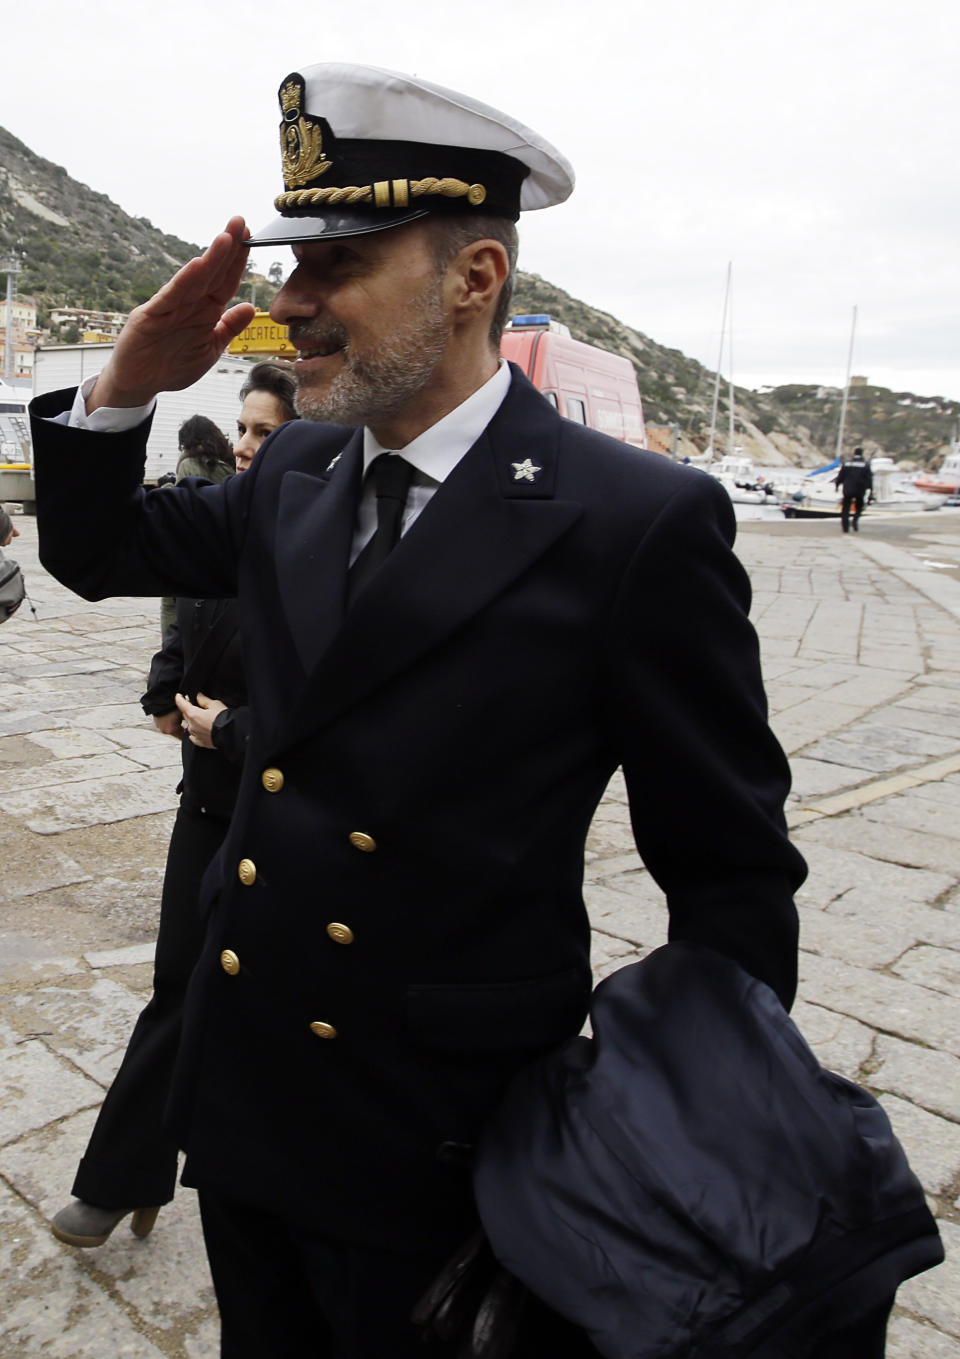 Italian Coast Guard Capt. Gregorio De Falco salutes as he arrives on the Tuscan Island Isola del Giglio, Italy, Sunday, Jan. 13, 2013.  De Falco was heard ordering the captain, who had abandoned the ship with his first officers, back on board to oversee the evacuation. But Capt. Francesco Schettino resisted the order, saying it was too dark and the ship was tipping dangerously. Survivors of the Costa Concordia shipwreck and relatives of the 32 people who died marked the first anniversary of the grounding Sunday. (AP Photo/Gregorio Borgia)